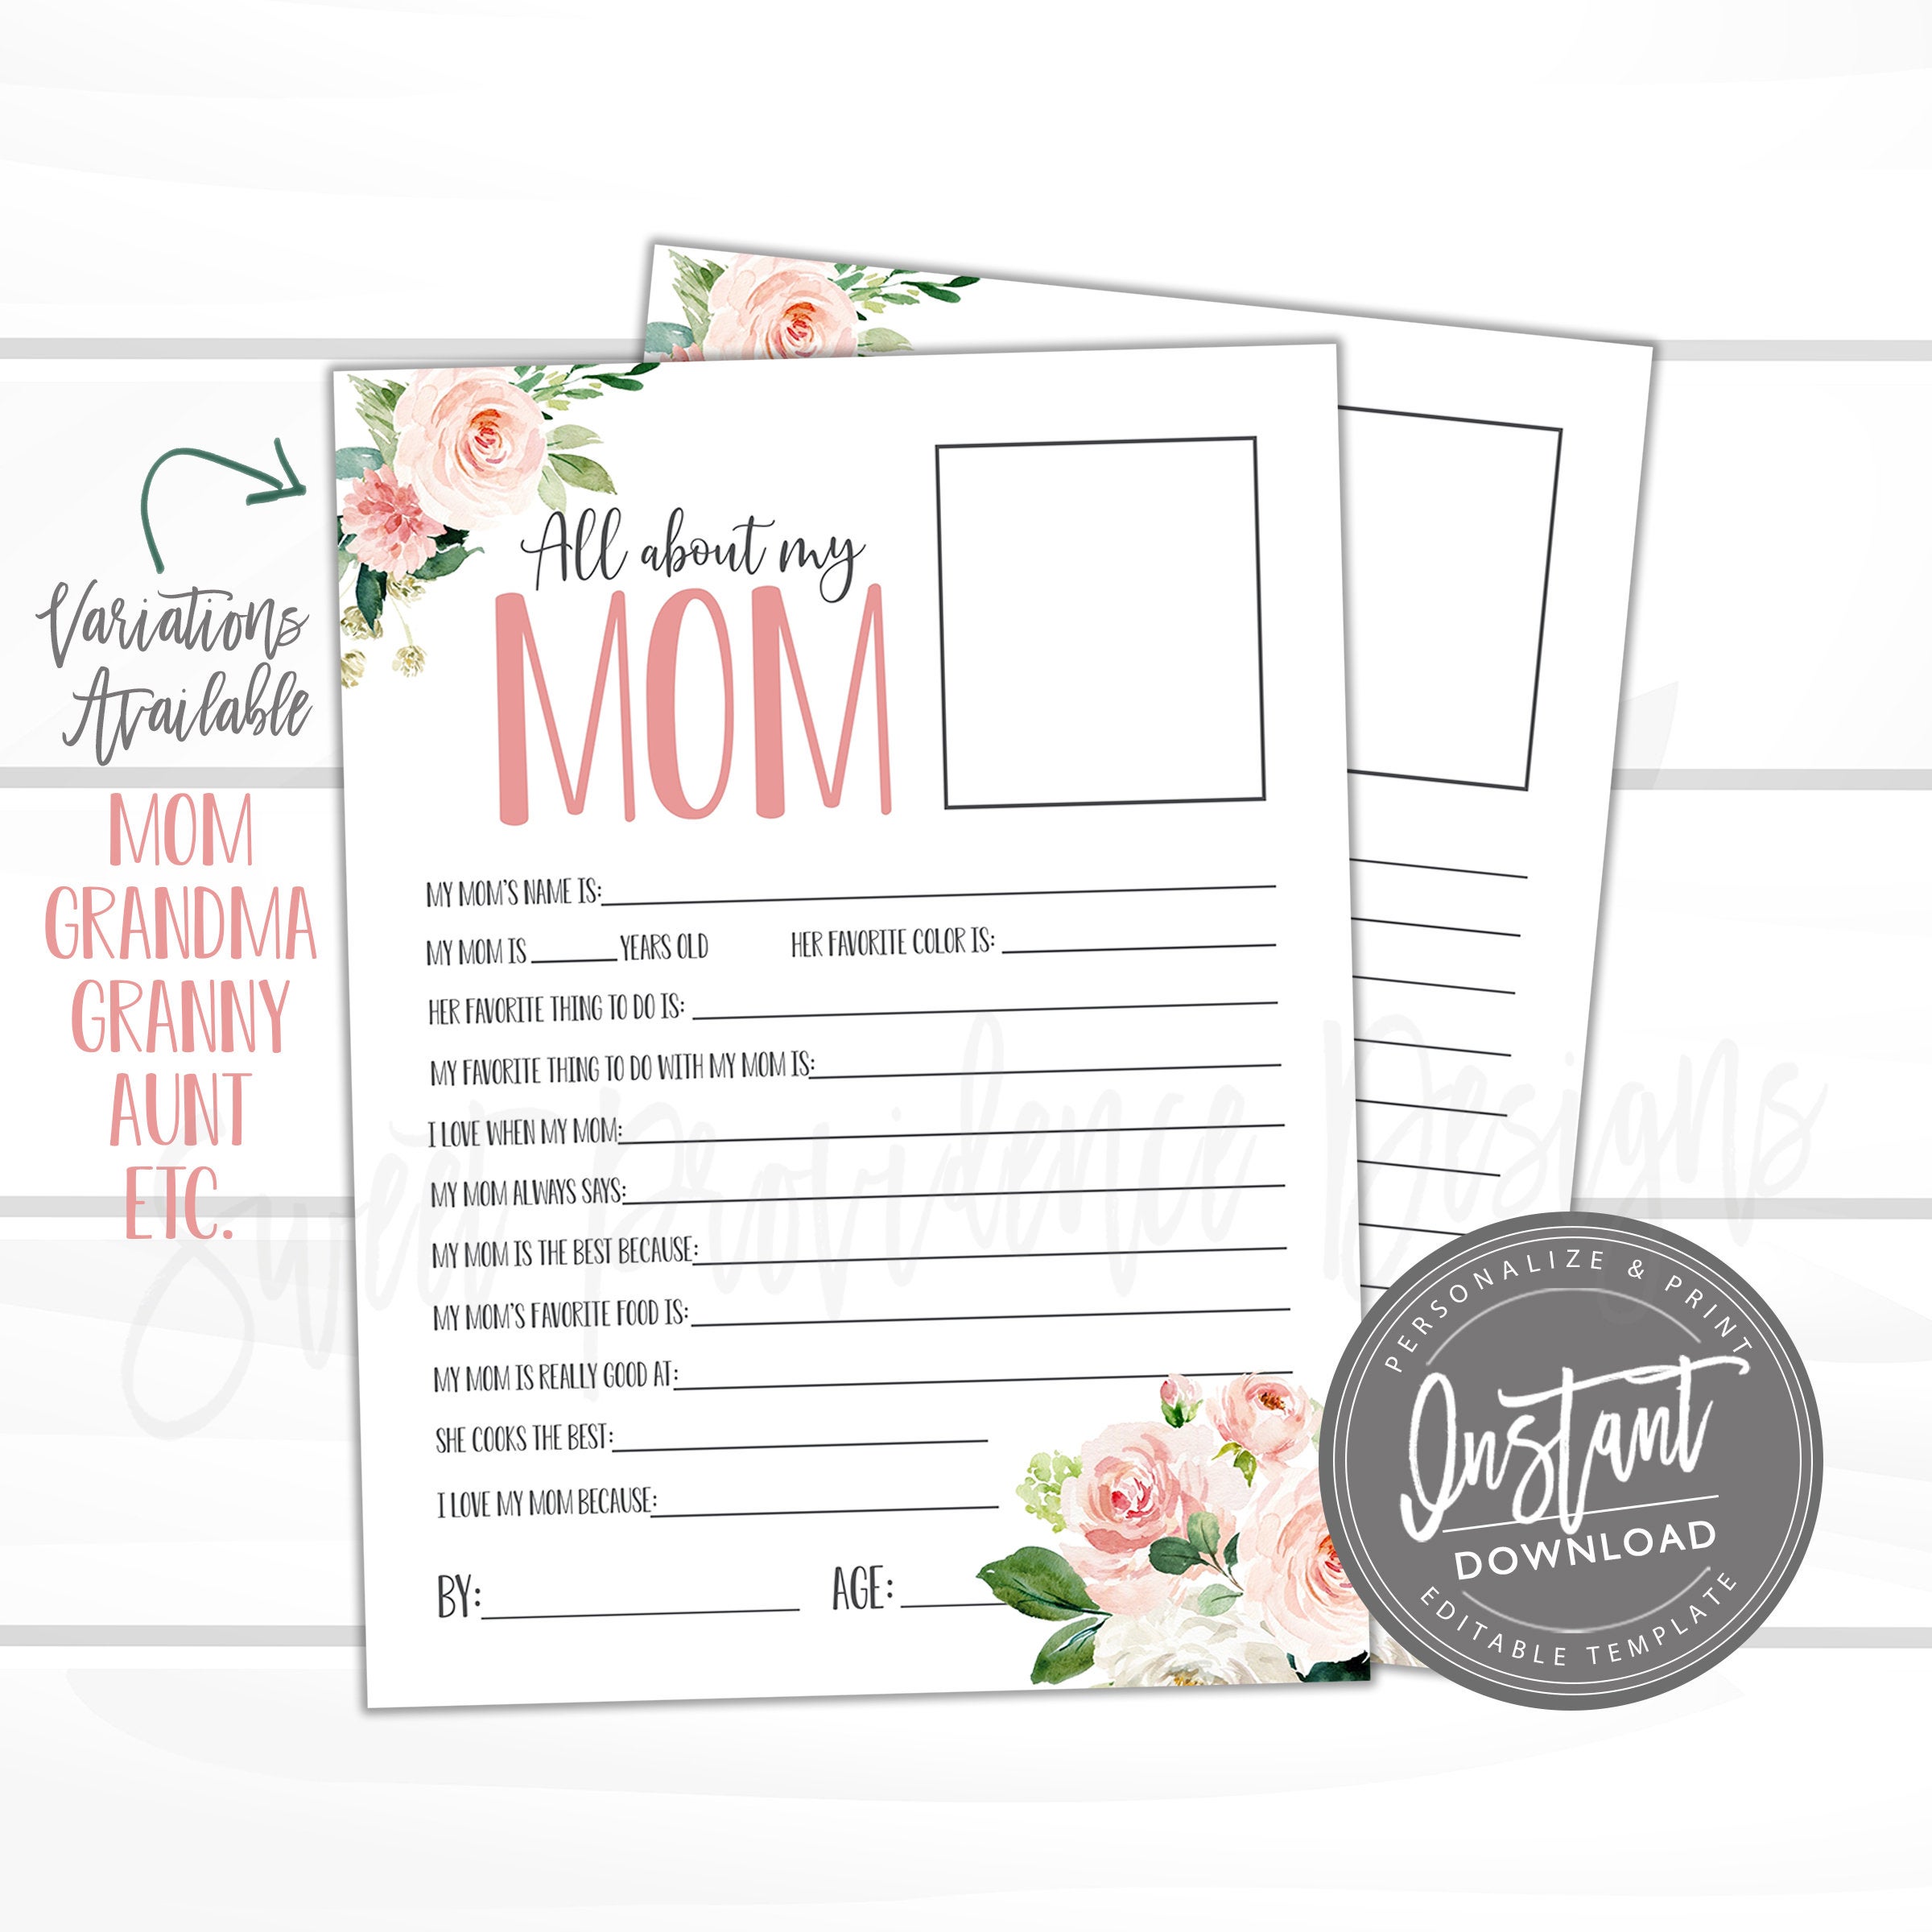 I Love My Mom Because Printable- A Thoughtful Gift For Mom